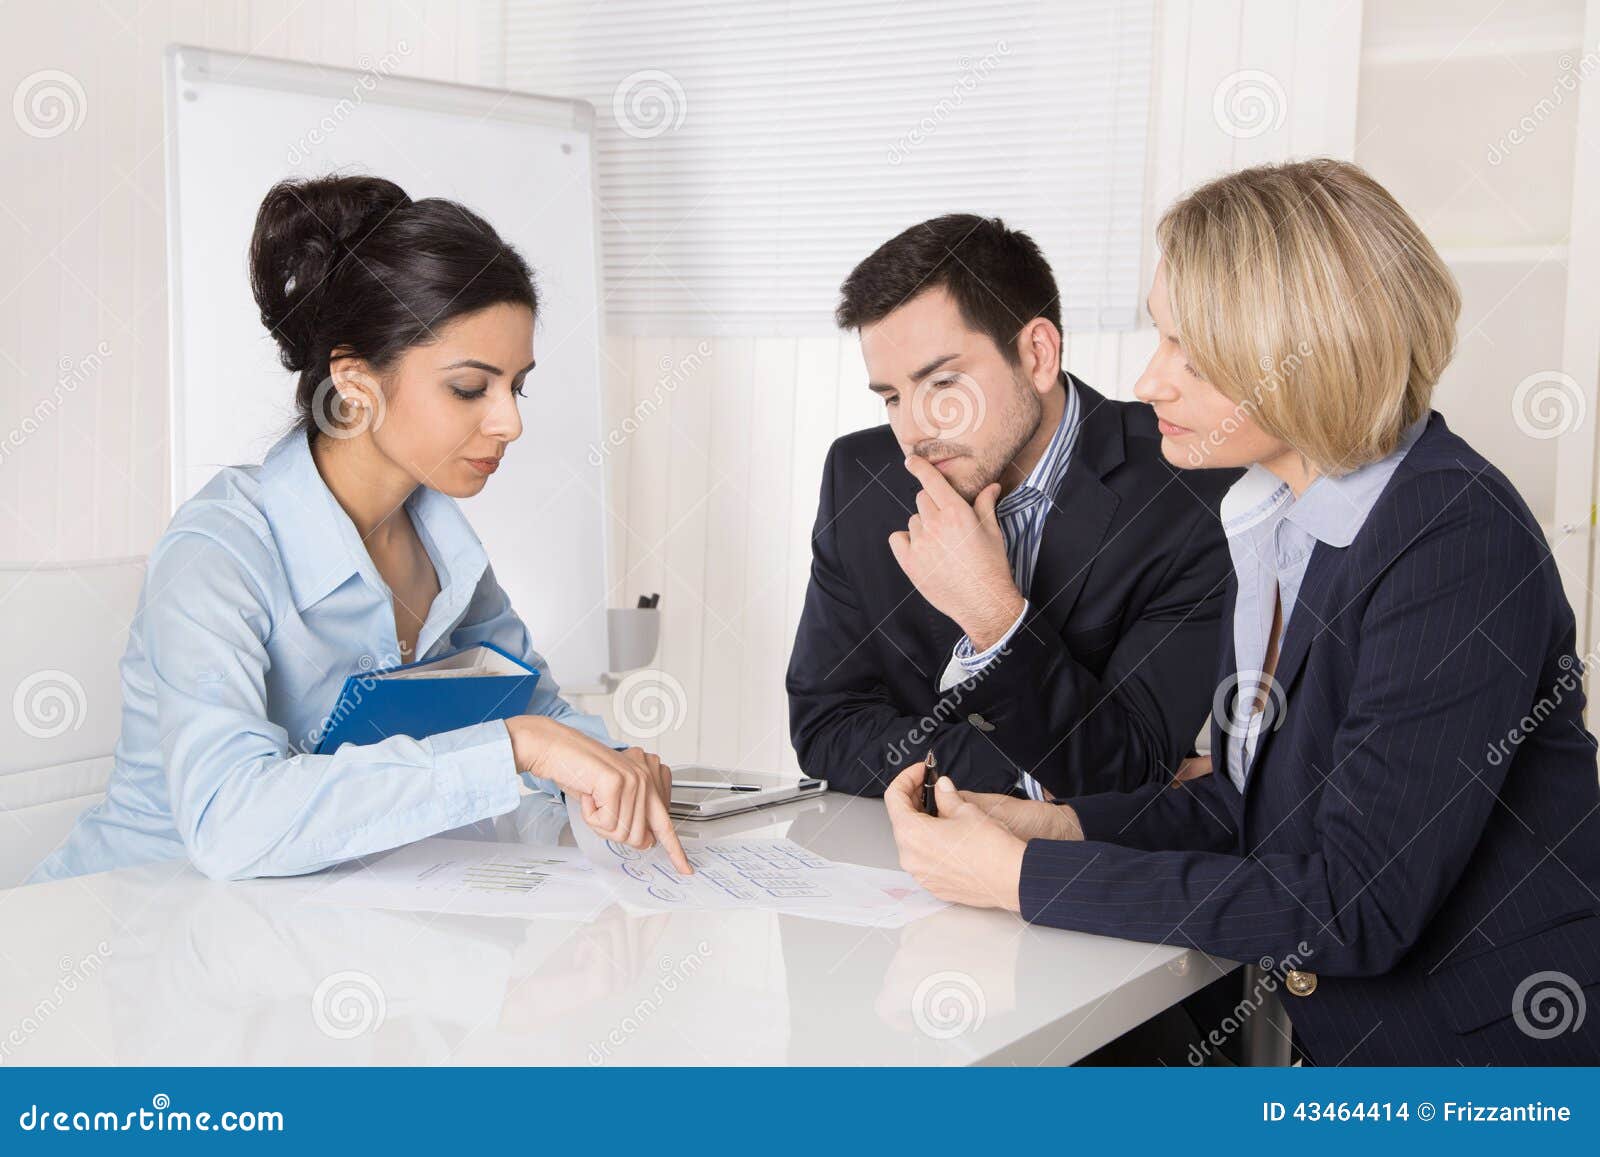 group professional business team sitting table talki talking together male female people wearing blue clothes 43464414